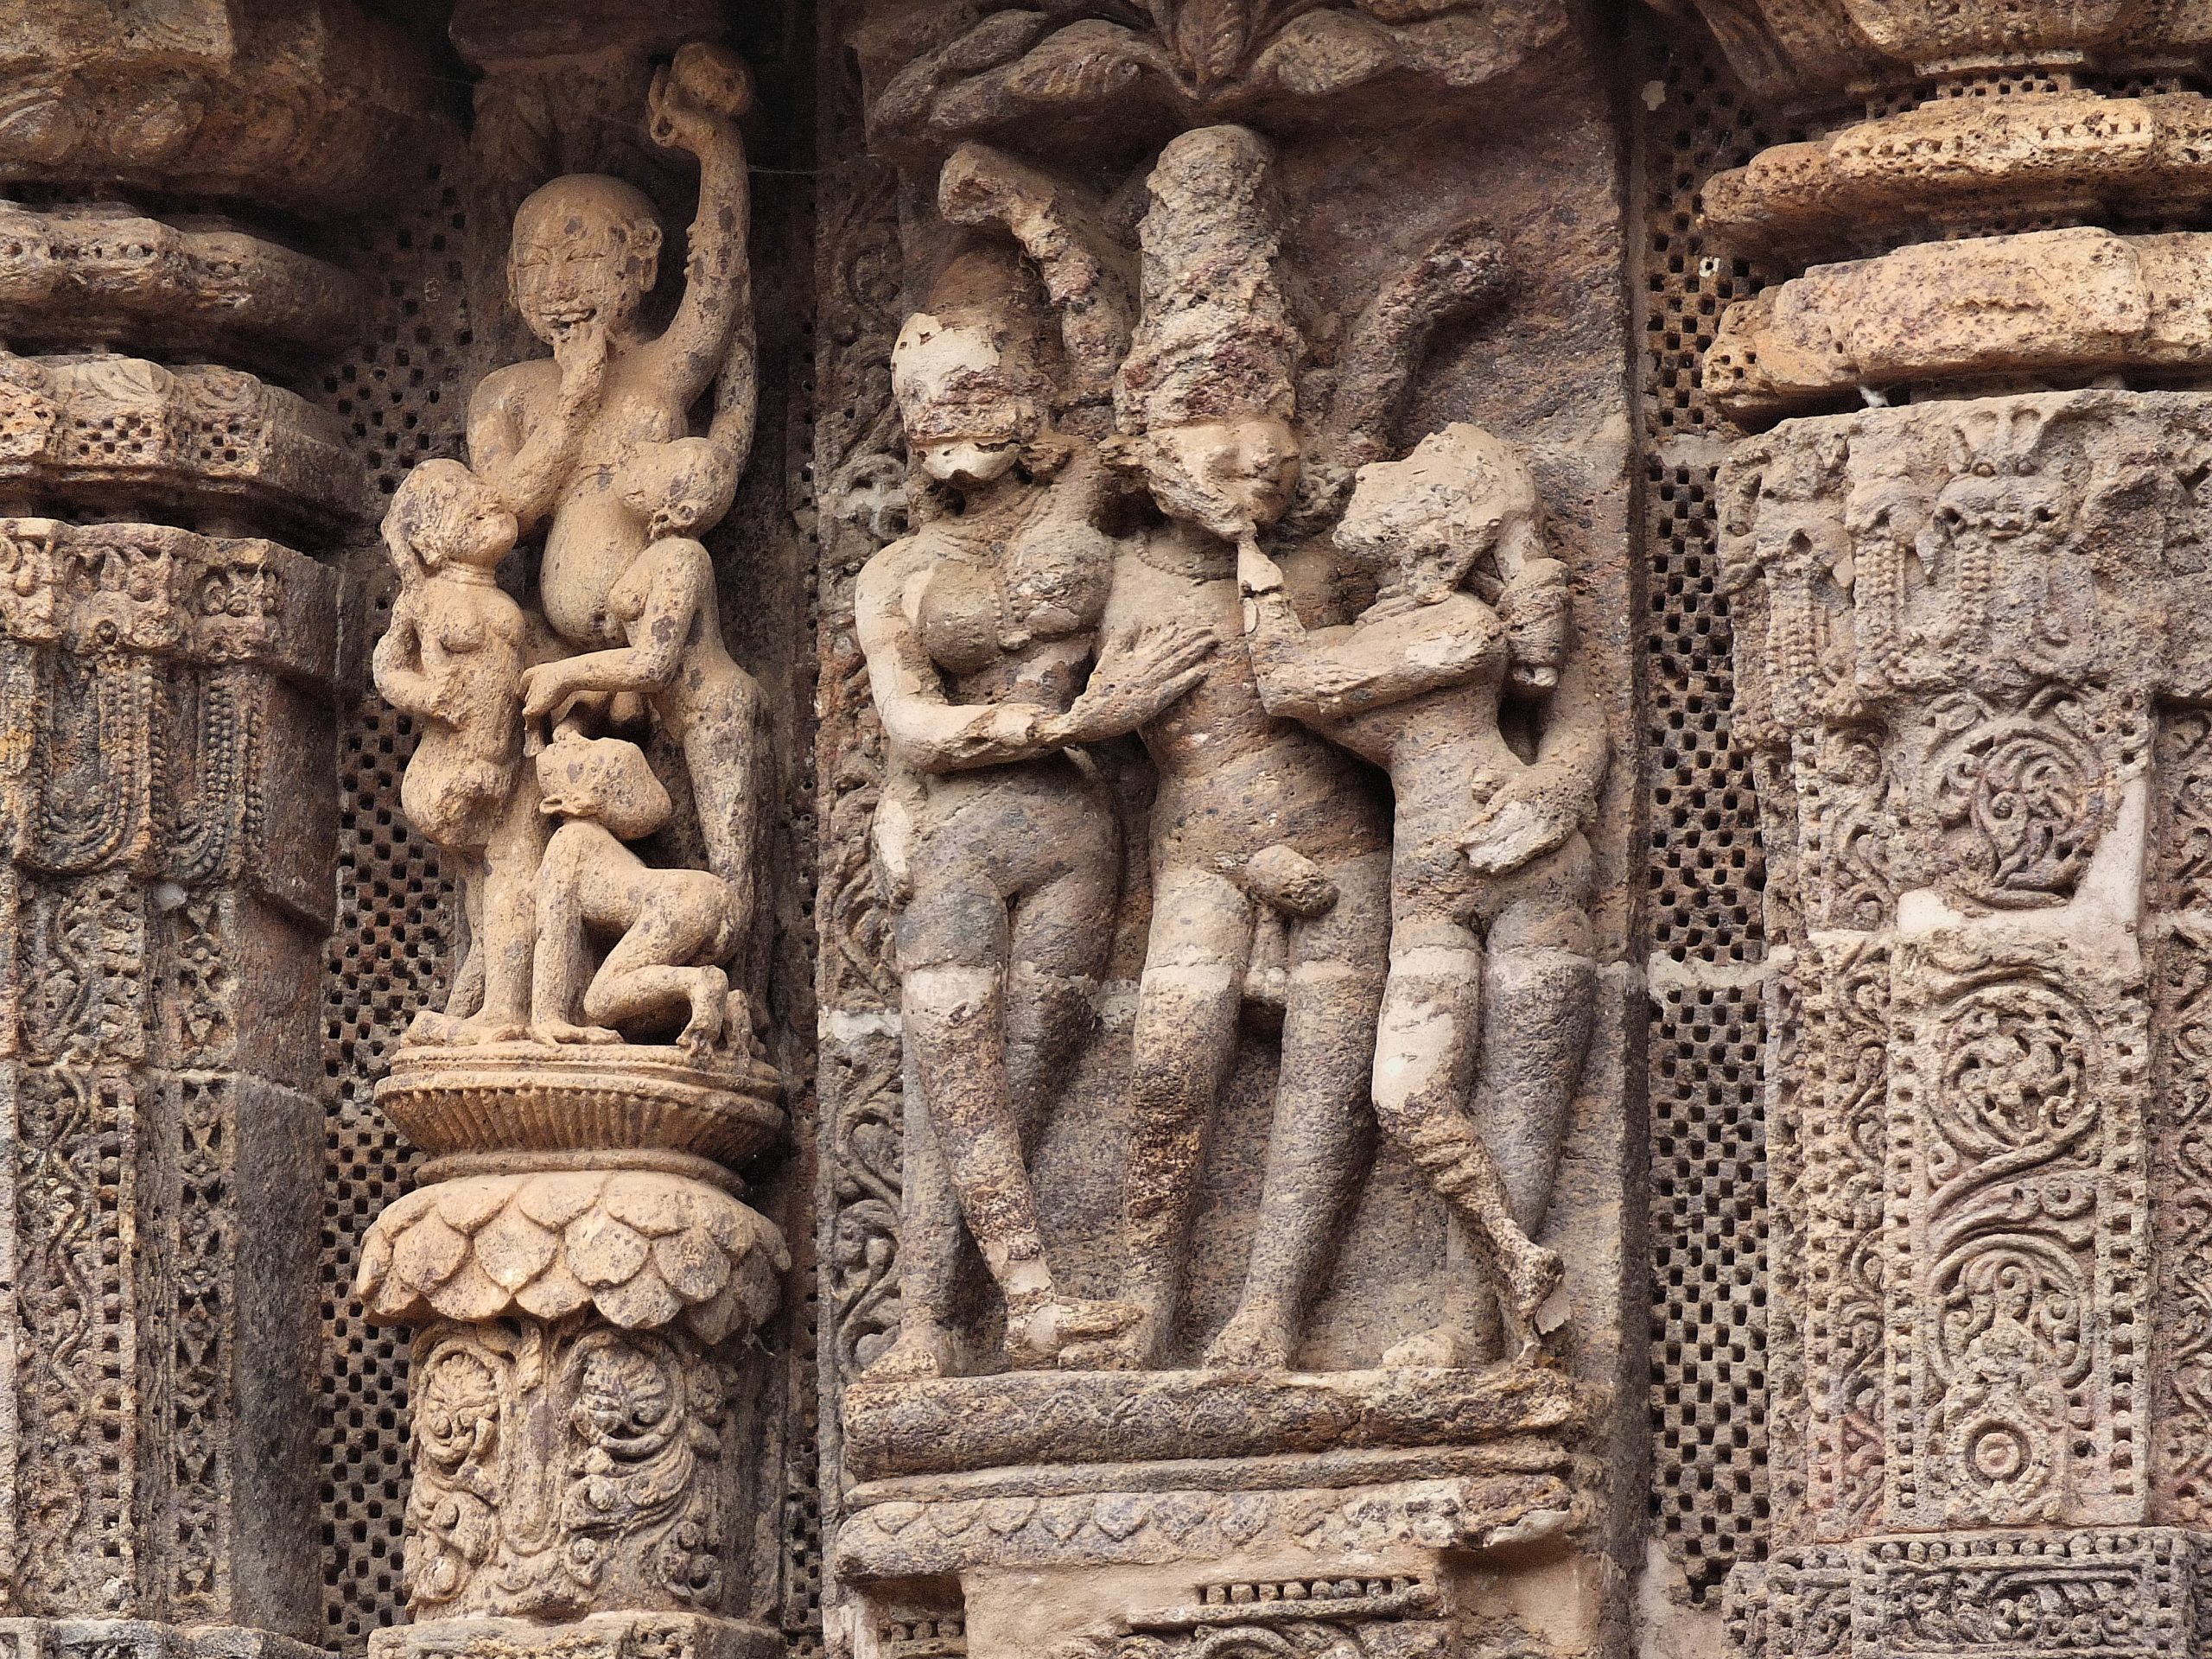 Two stone carvings of figures in sexual union in the niches of a wall featuring floral and chequered patterns.